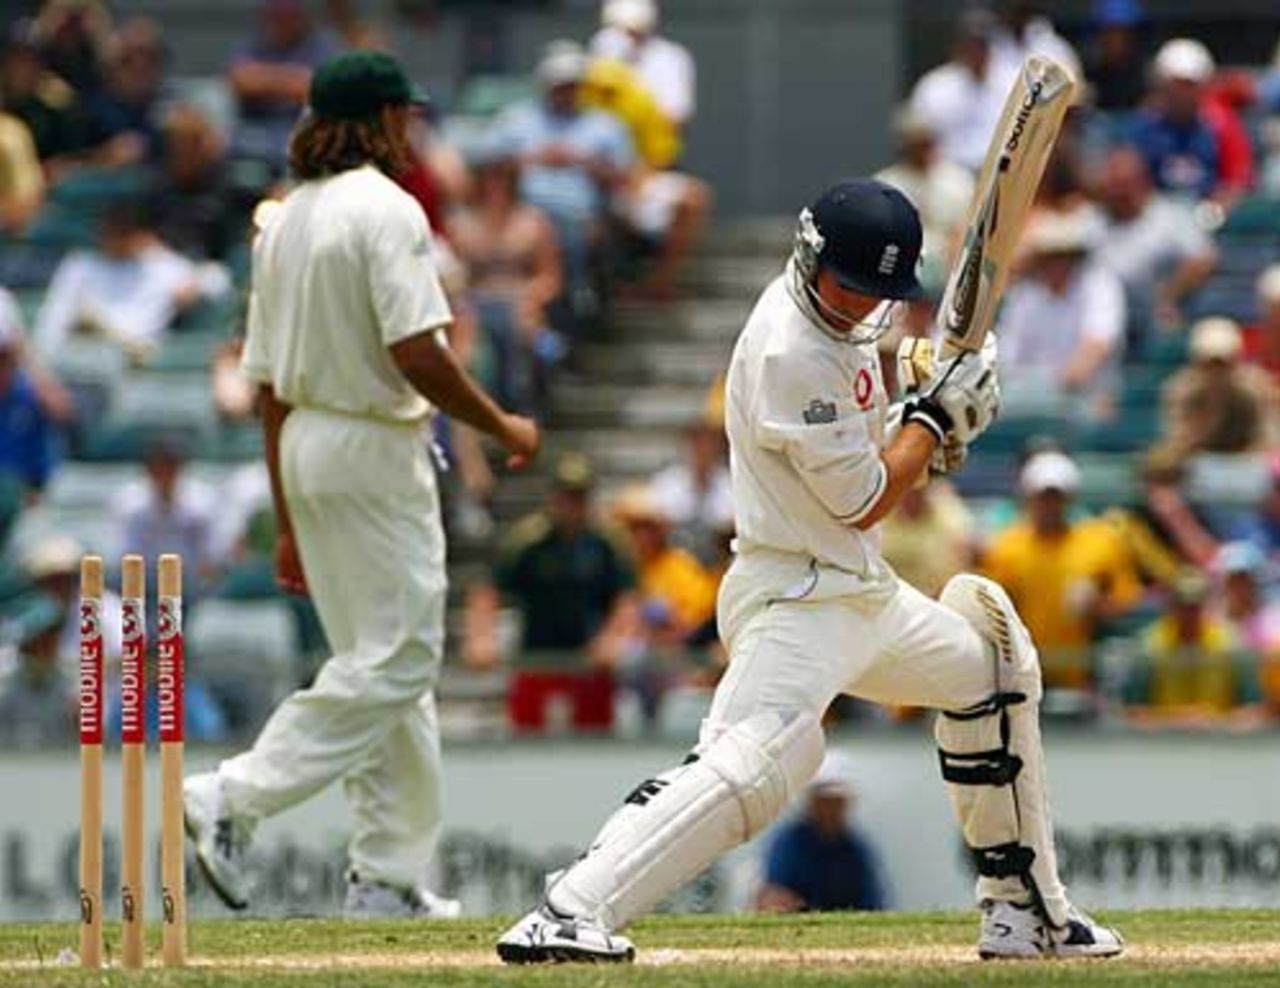 Geraint Jones looks back after being run out by Ricky Ponting, Australia v England, 3rd Test, Perth, December 18, 2006